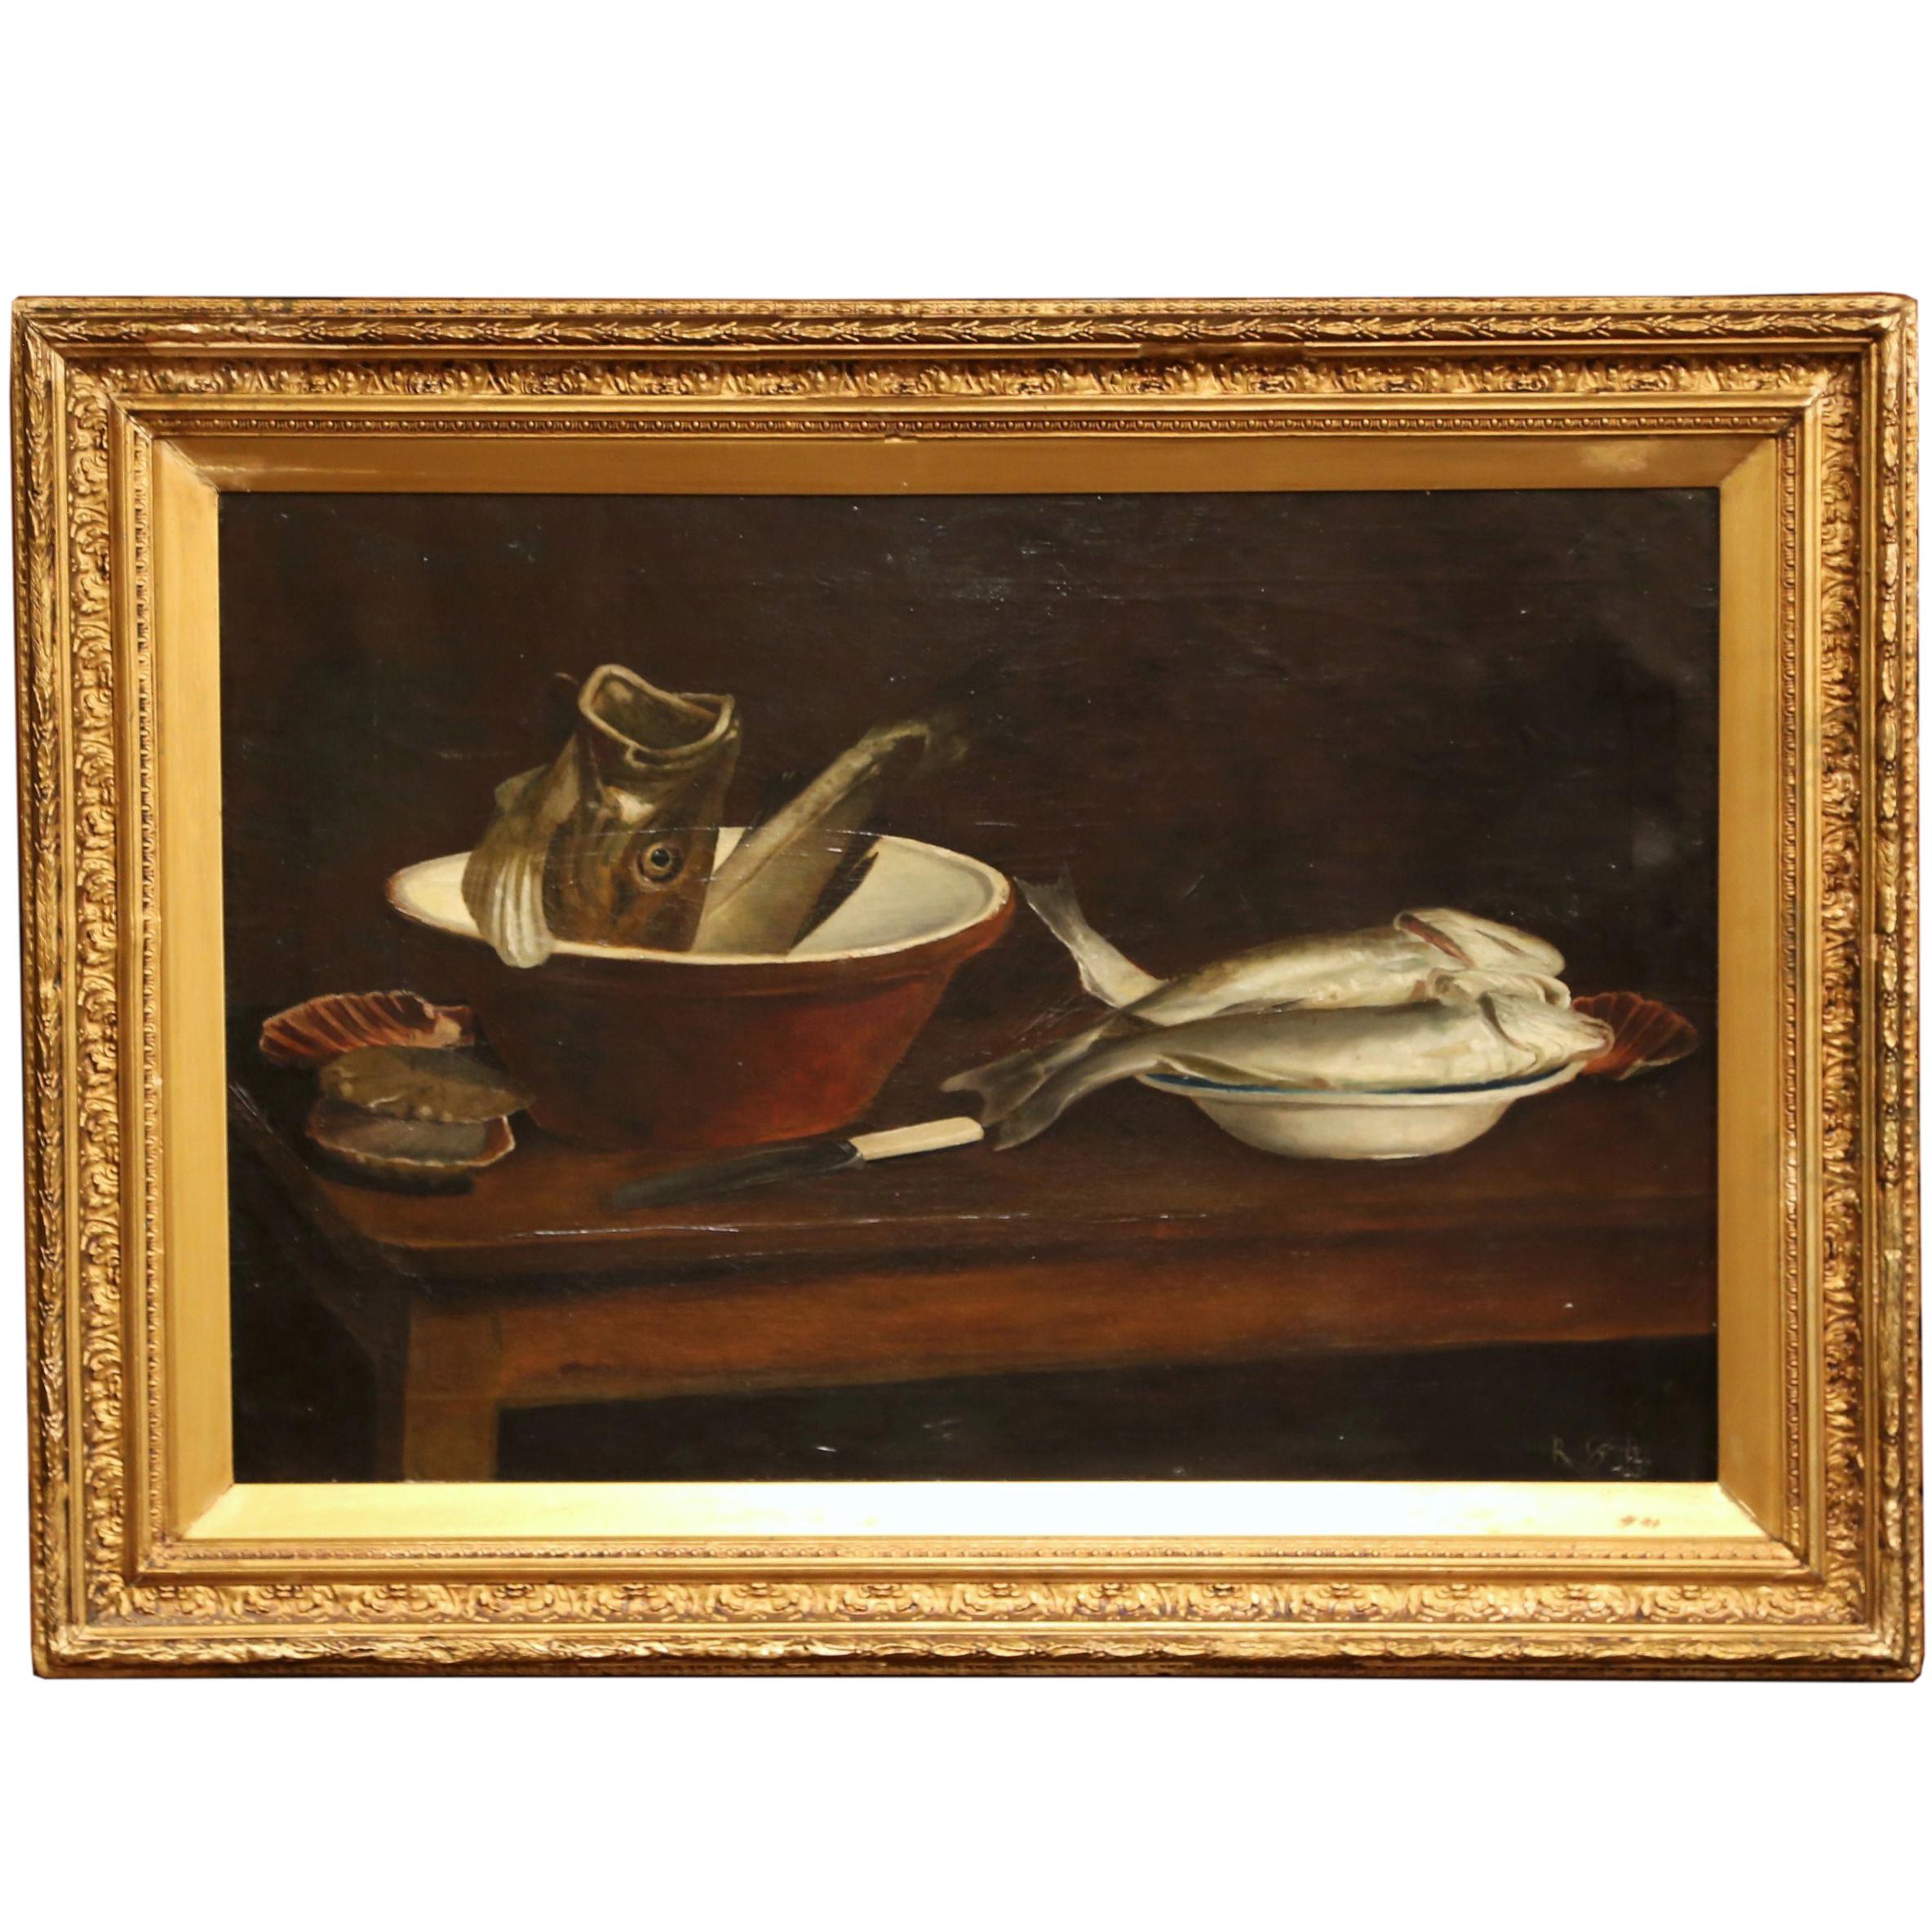 Unknown Still-Life Painting - 19th Century English Still Life Painting in Gilt Frame Signed and Dated 1847